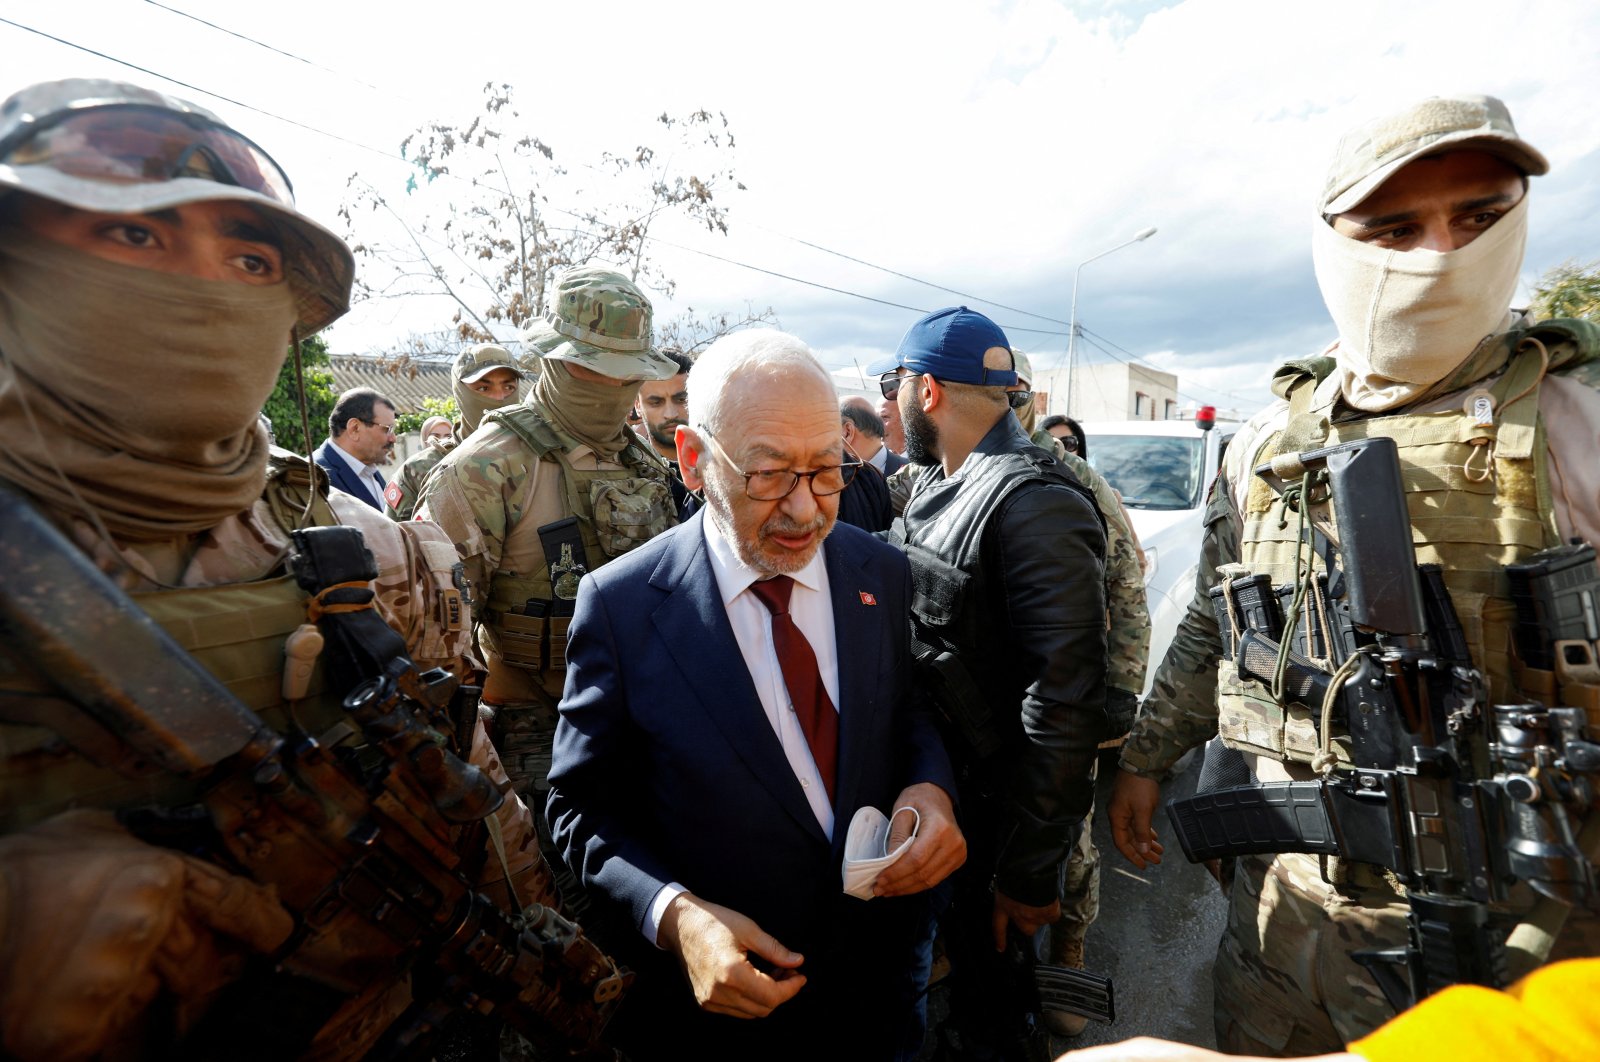 Tunisia&#039;s Rached Ghannouchi, head of the Ennahda party, is surrounded by presidential guard members in Tunis, Tunisia, April 1, 2022. (Reuters Photo)